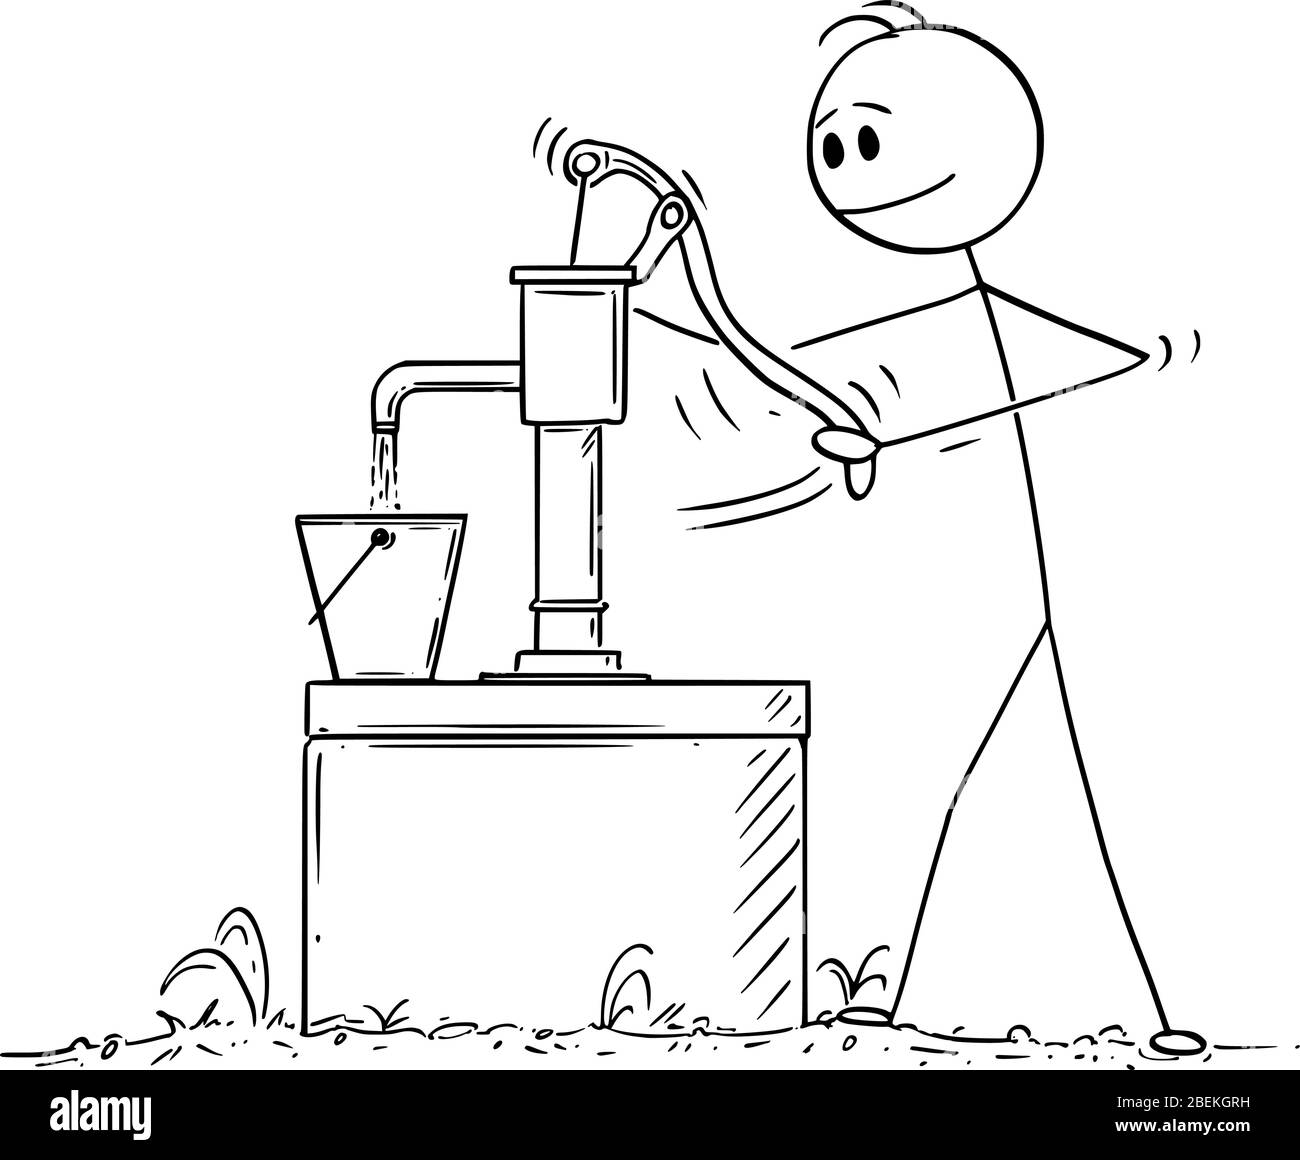 Vector cartoon stick figure drawing conceptual illustration of man or farmer pumping or drawing water from well . Stock Vector